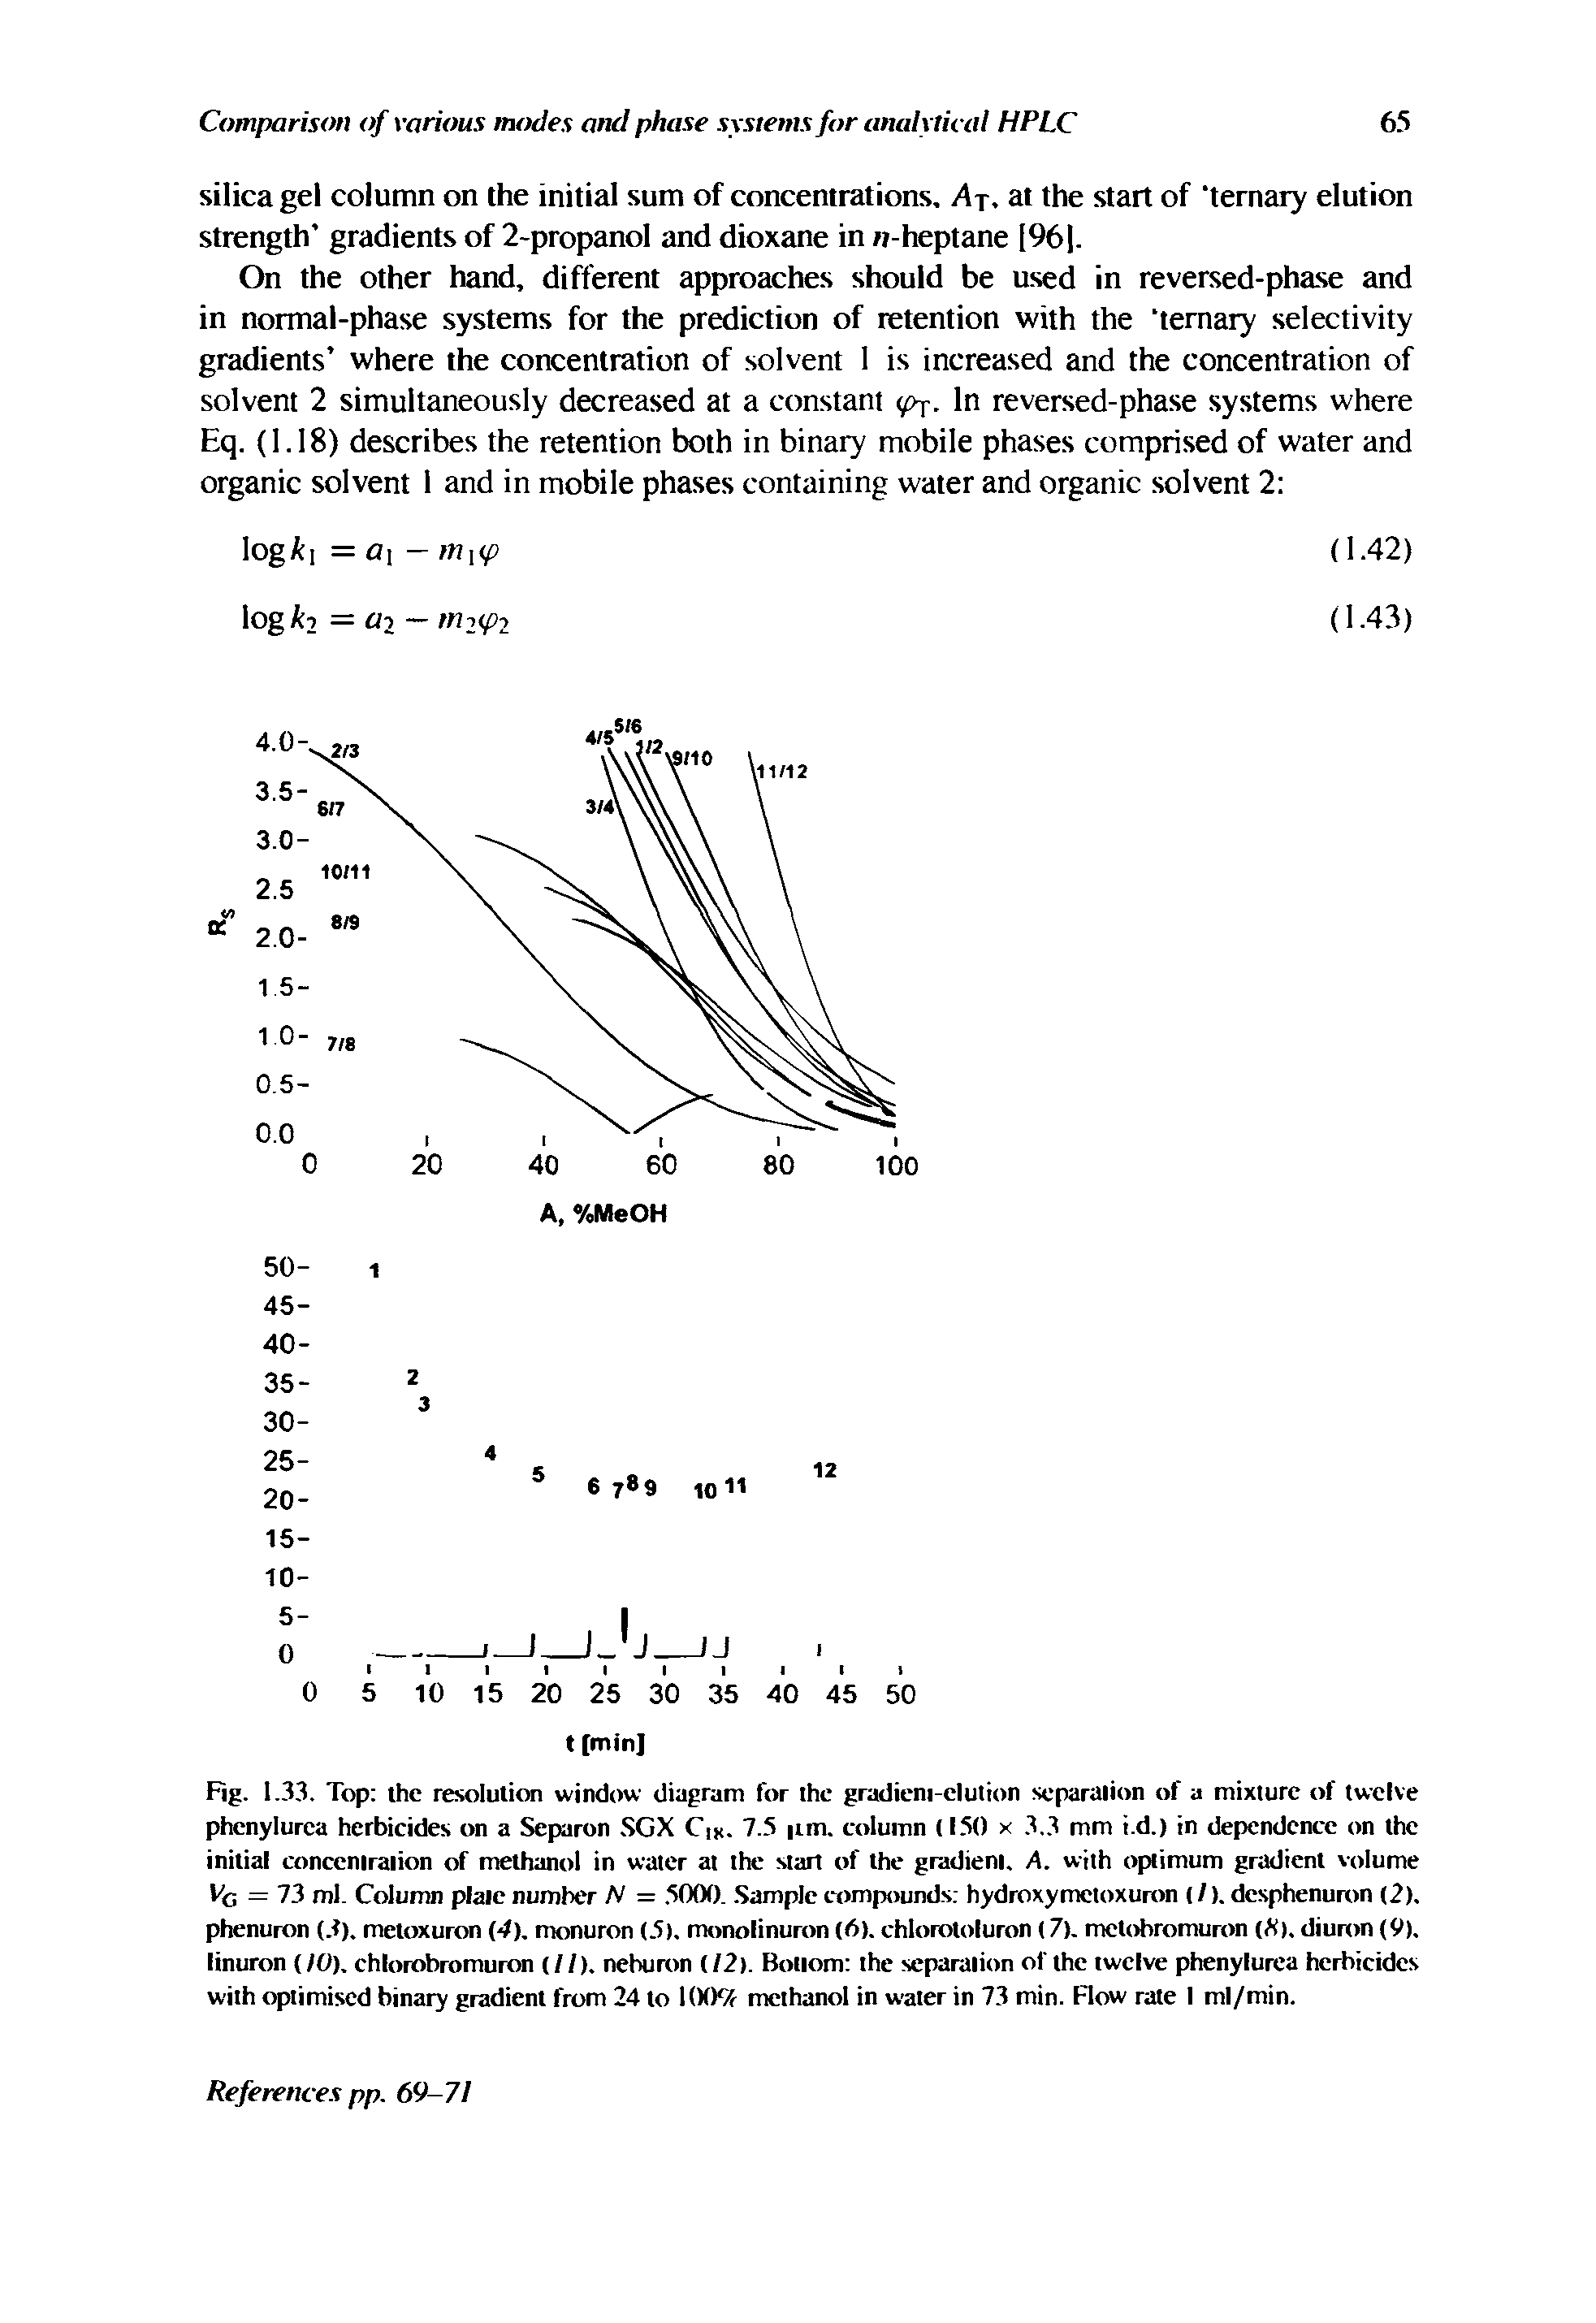 Fig. 1.33. Top the resolution window diagram for the gradieni-elulion separation of a mixture of twelve phenylurea herbicides on a Separon SGX Cix. 7.5 nm. column (150 x 3.3 mm i.d.) in dependence on the initial concentration of methanol in water at the start of the gradient, A. with optimum gradient volume Mg = 73 ml. Column plate number N =. 5000.. Sample compounds hydroxymetoxuron (/). desphenuron (2), phenuron (.1). metoxuron (4). monuron (5), monolinuron (6). chlorotoluron (7), metobromuron (X), diuron (9), linuron (/O), chlorobromuron (//). neburon U2). Bottom the separation of the twelve phenylurea herbicides with optimised binary gradient from 24 to l(X)9f methanol in water in 73 min. Flow rate I ml/min.